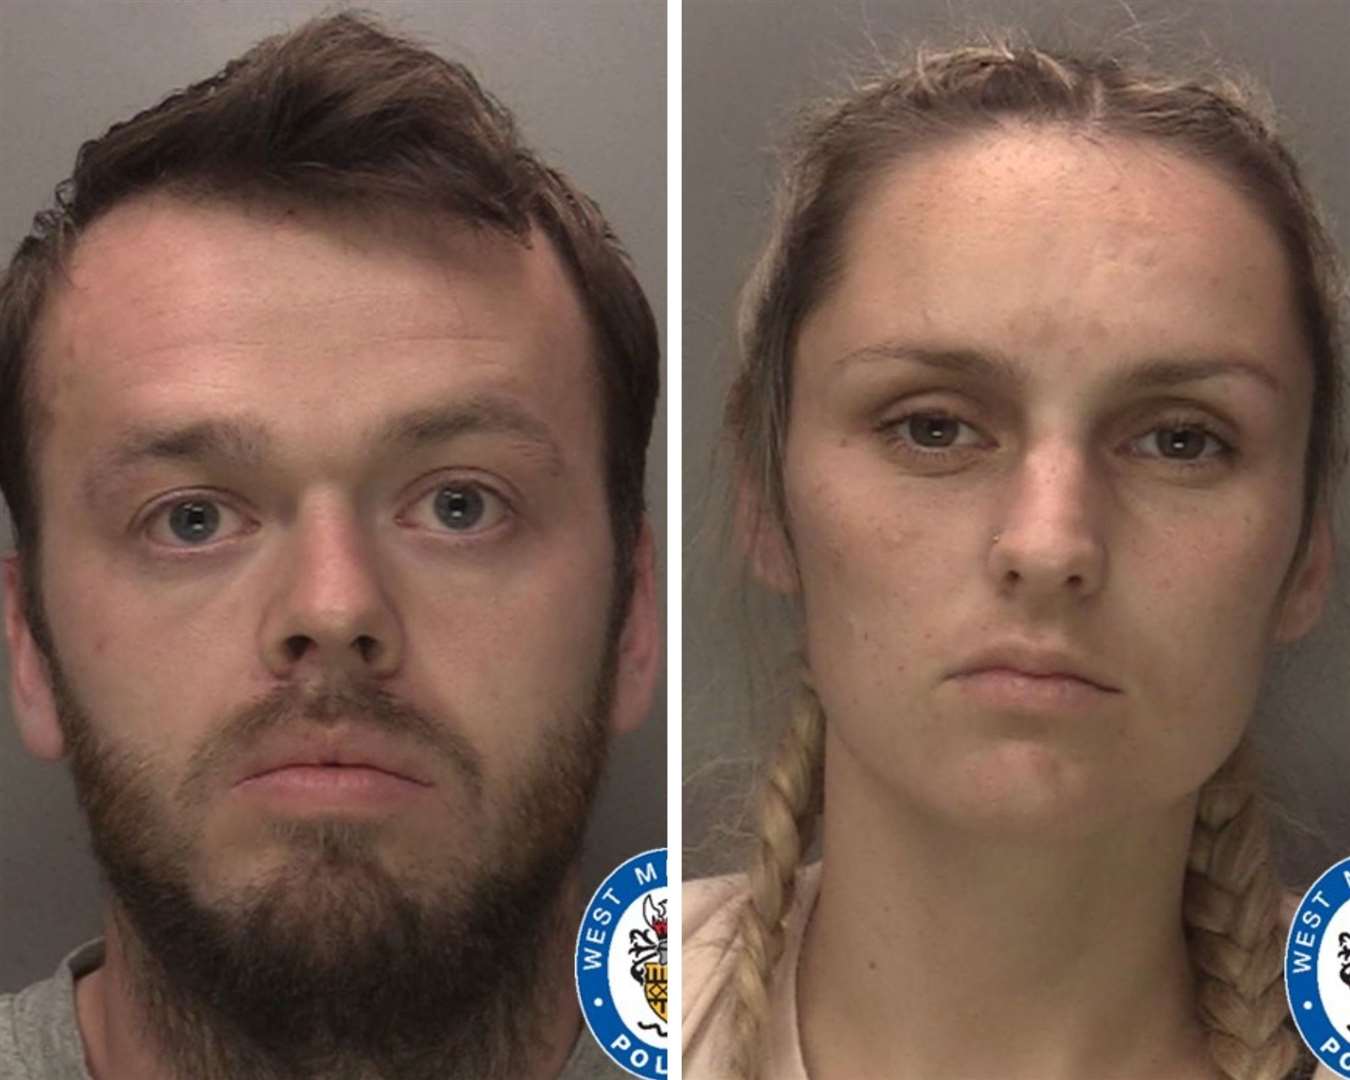 Arthur's father Thomas Hughes and his stepmother Emma Tustin have both been jailed for his killing